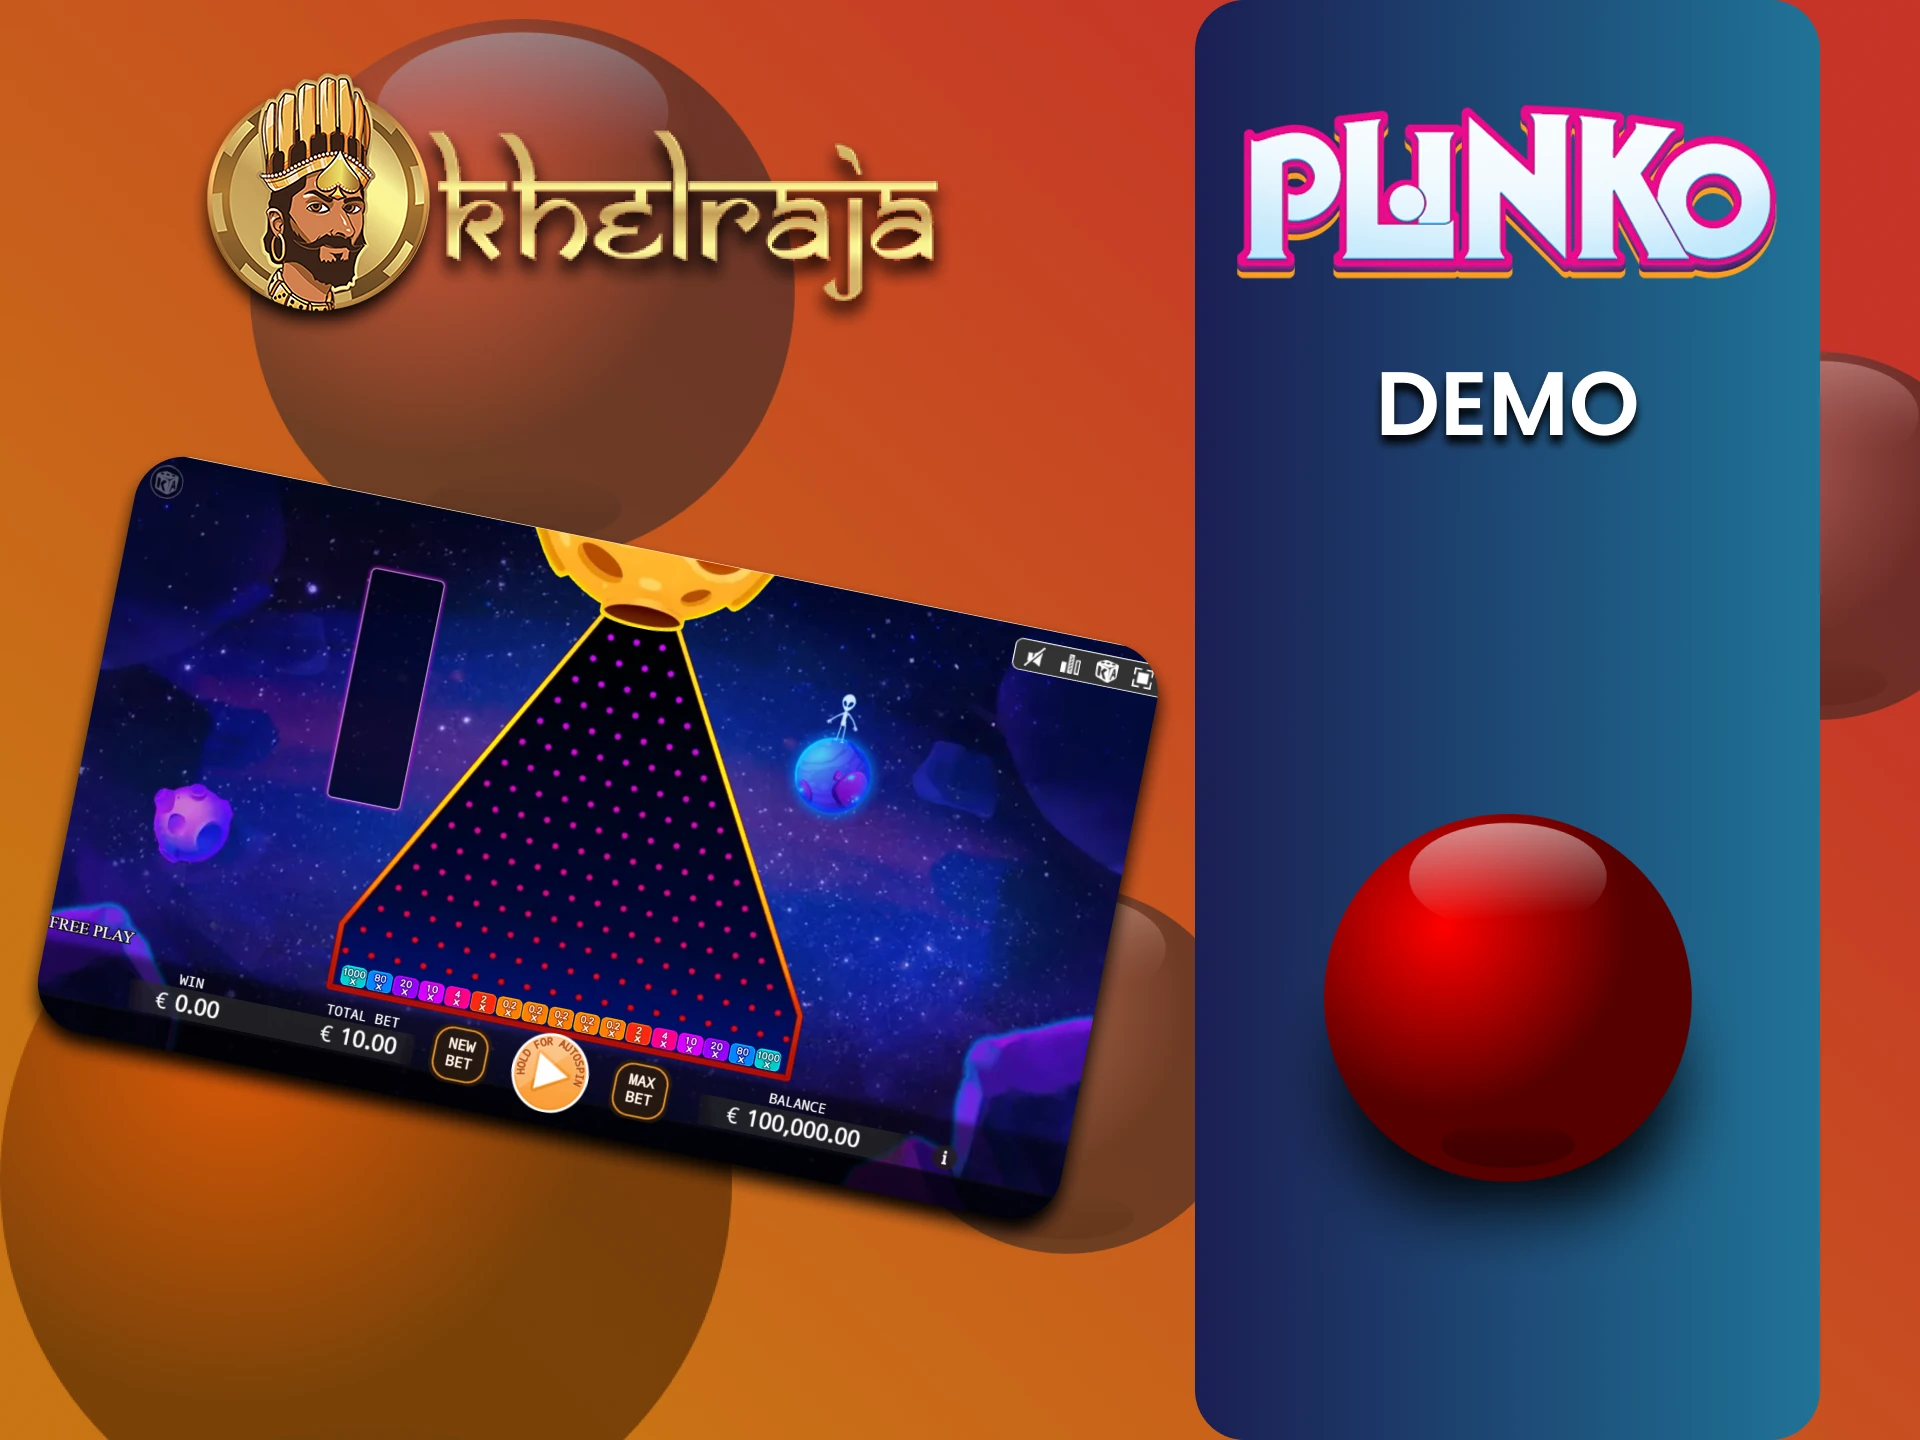 The demo version of Plinko on Khelraja is ideal for training.